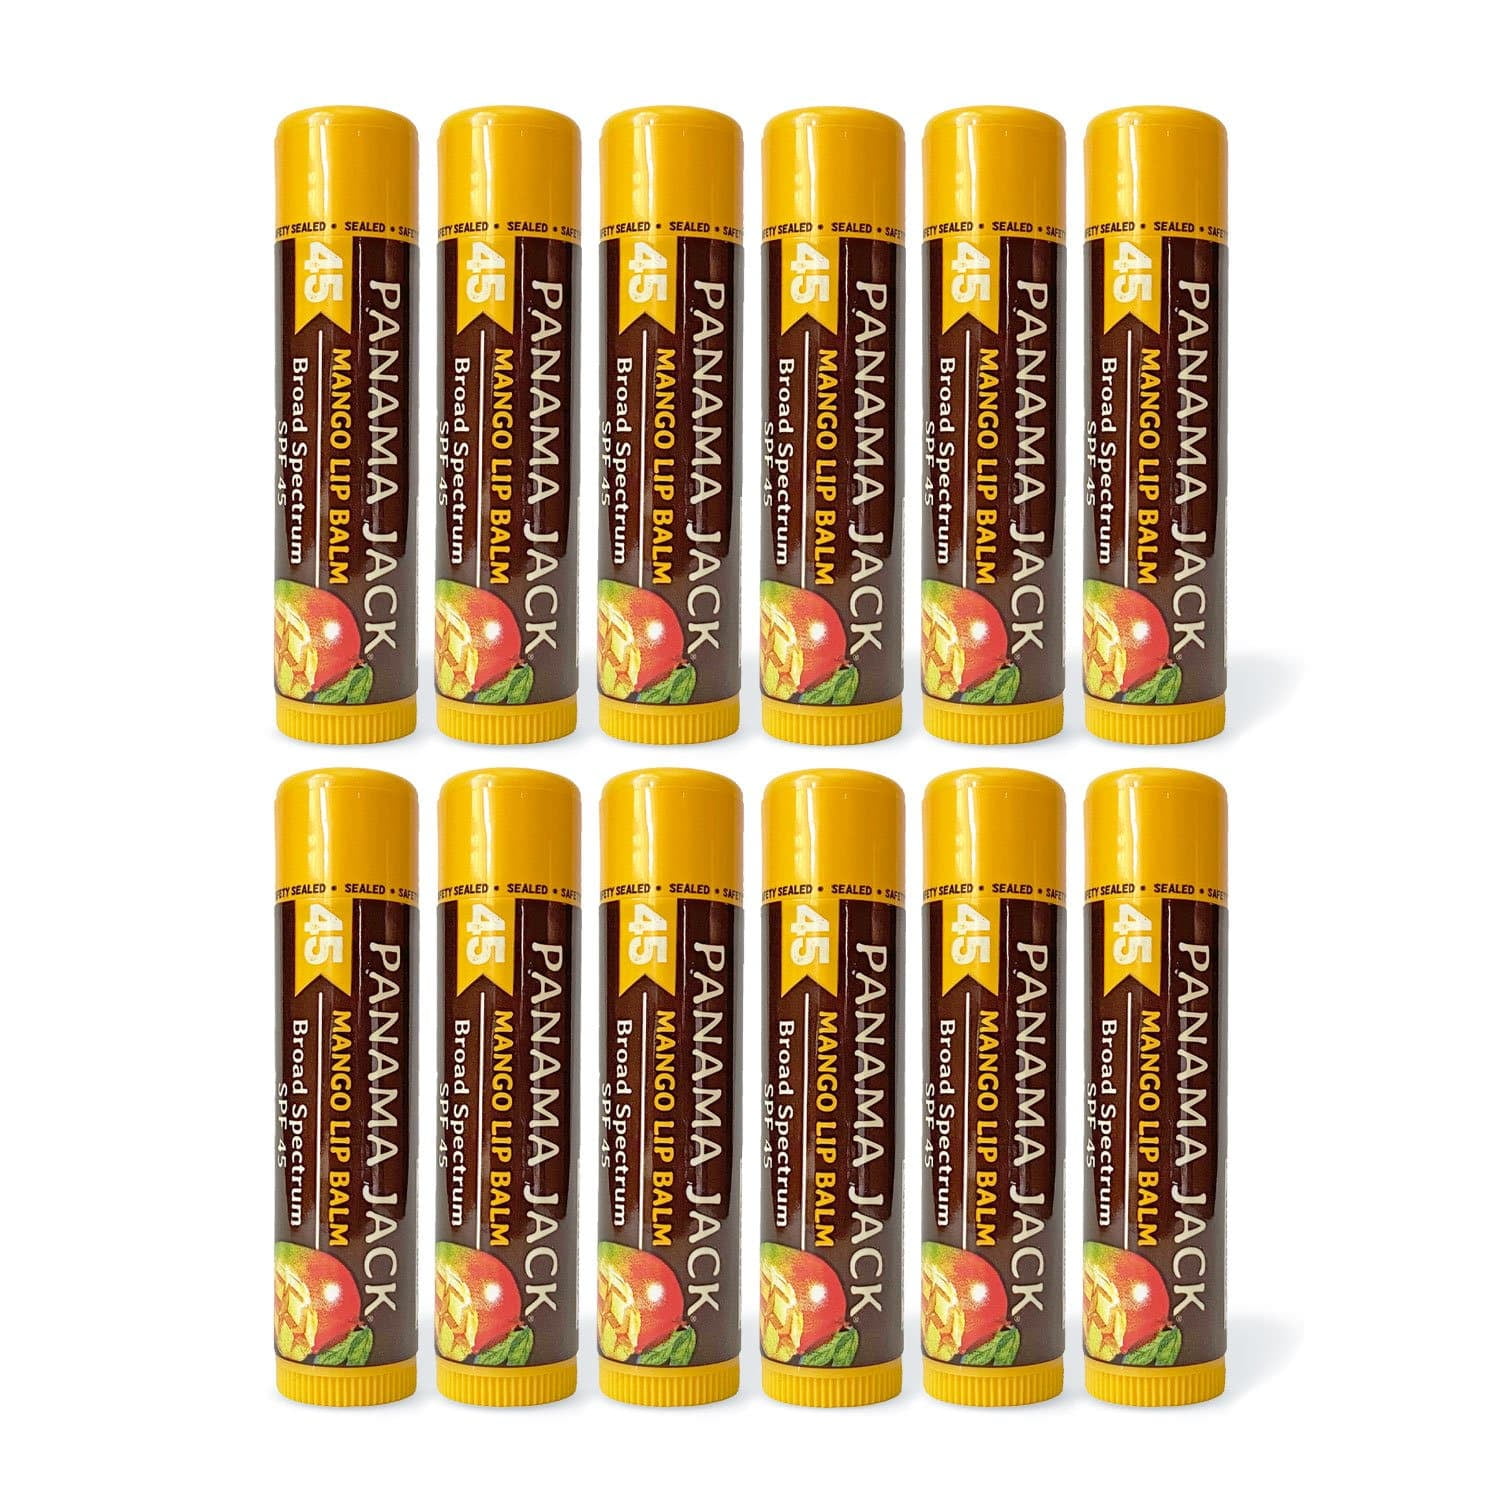 Panama Jack SPF 45 Lip - Broad UVA-UVB Sunscreen Protection, & Soothes Dry, Chapped Lips (Pack of 12, Mango) - Walmart.com